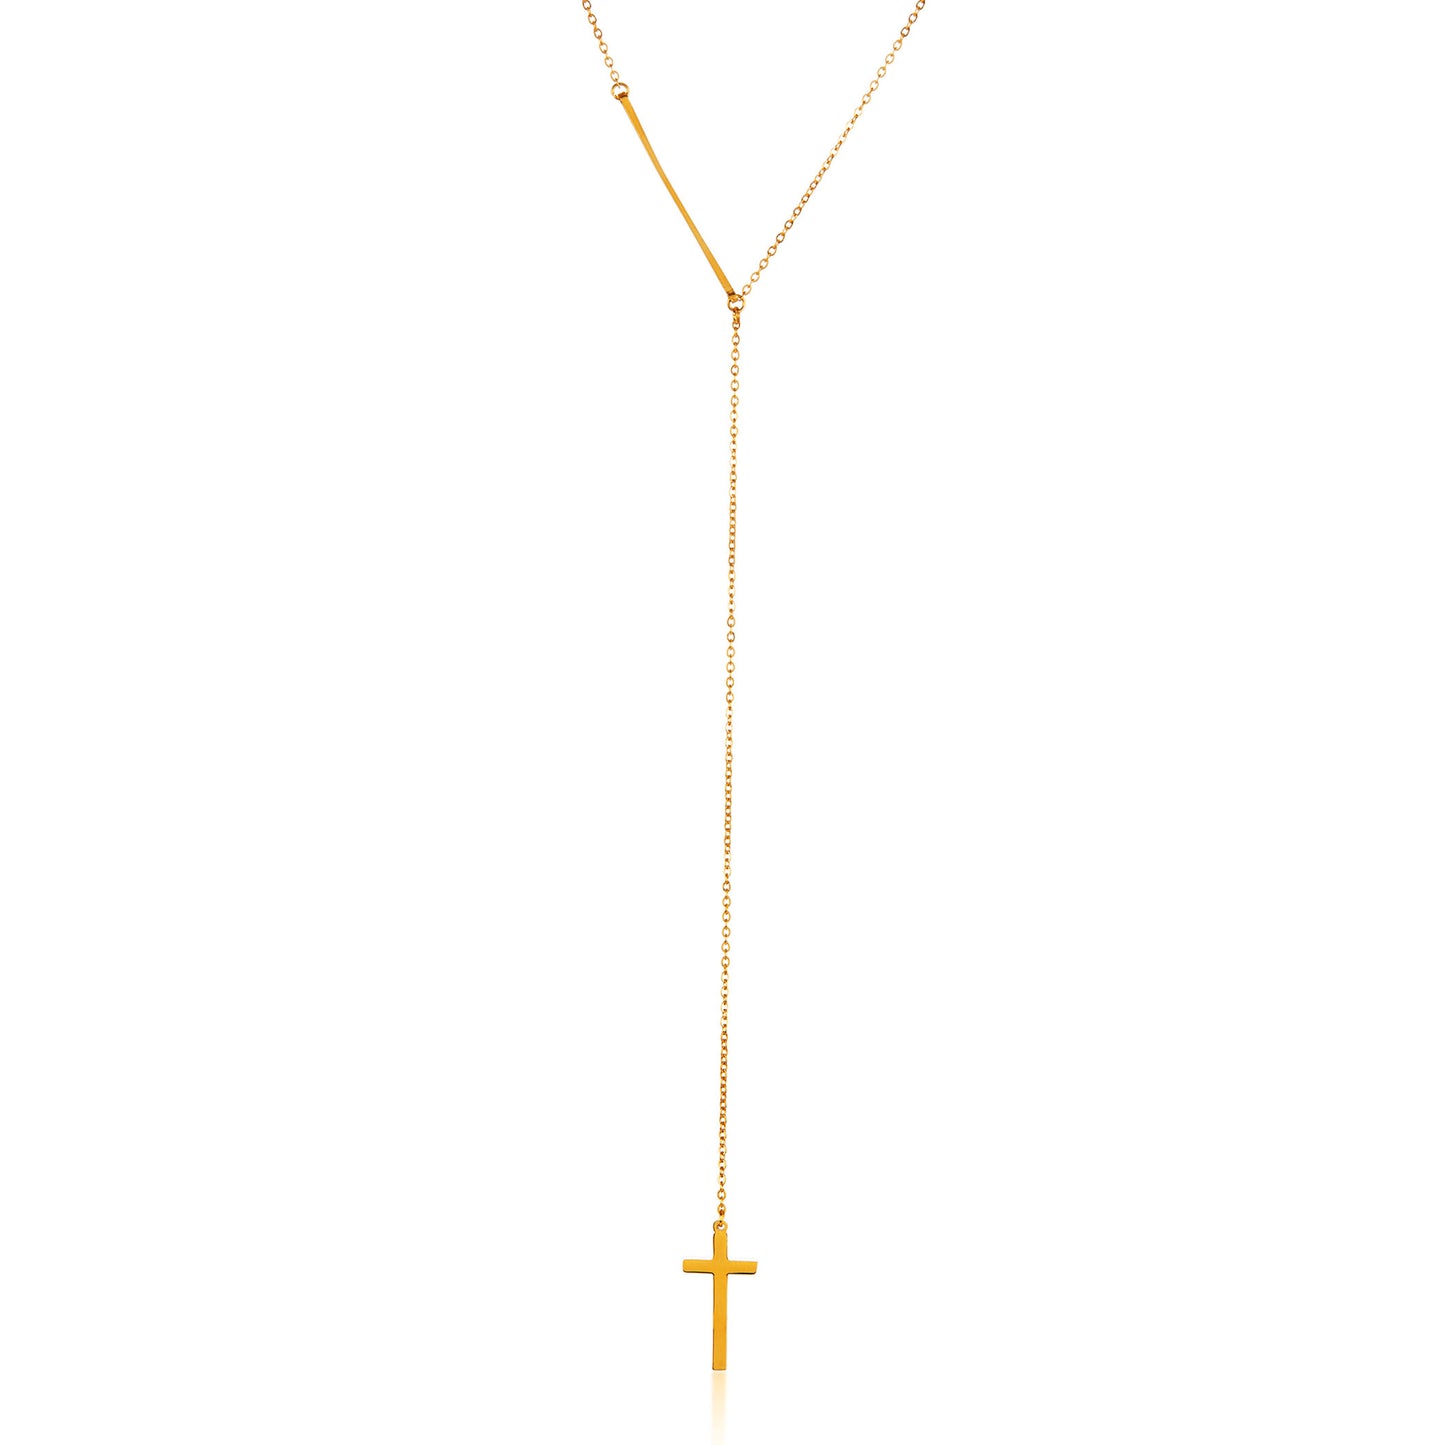 ELYA Women's High Polished Cross Drop Stainless Steel Cable Chain Pendant Necklace